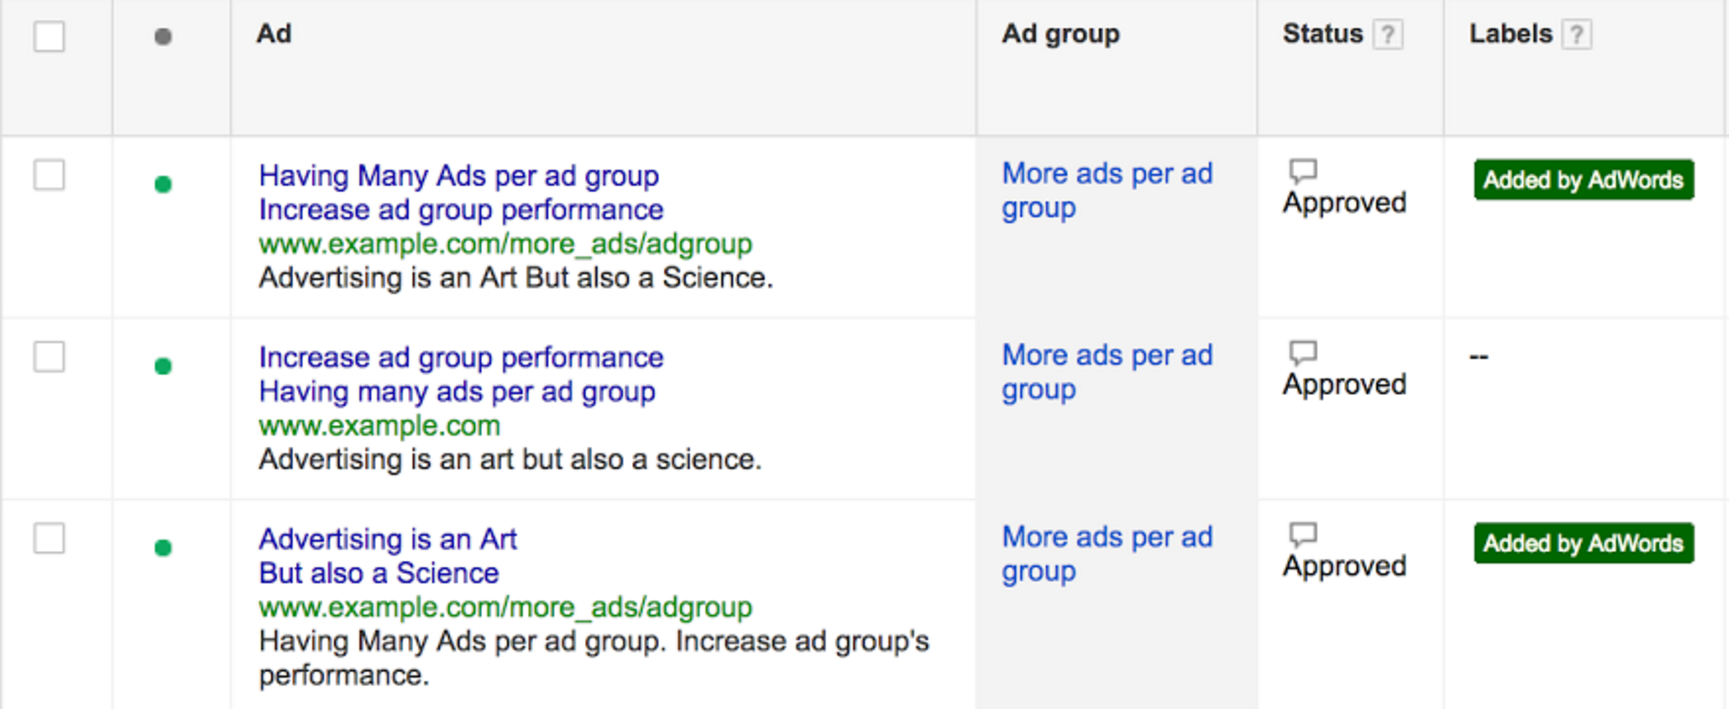 ads-added-by-adwords